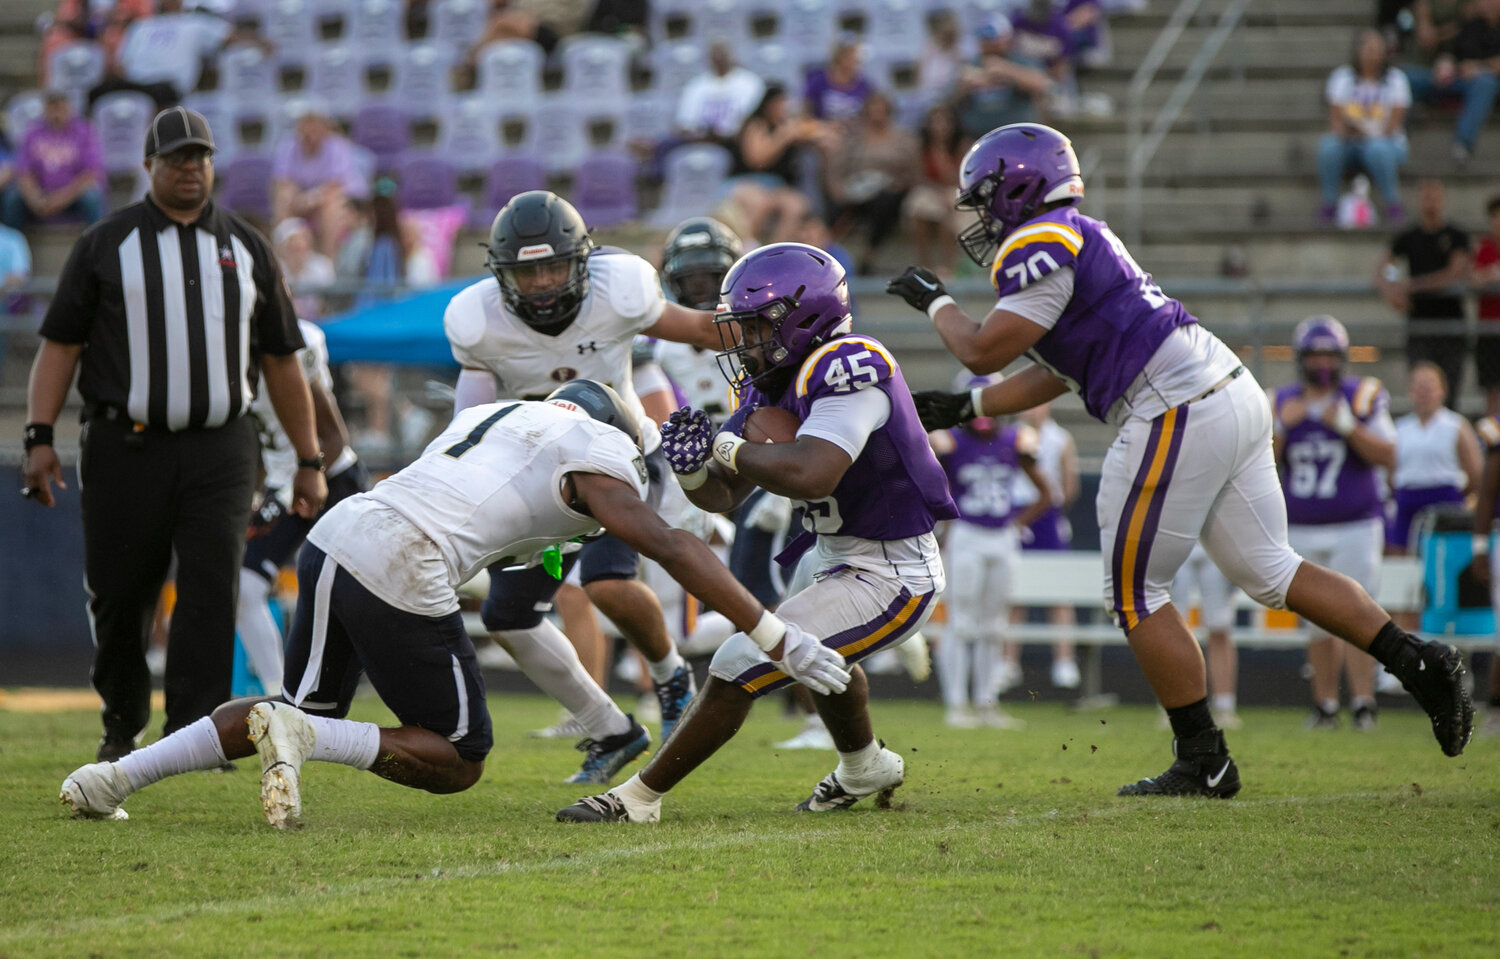 Perry Thompson comes up for a tackle on Nick Clark during spring game action between the Foley Lions and Daphne Trojans Friday, May 19, at Jubilee Stadium.